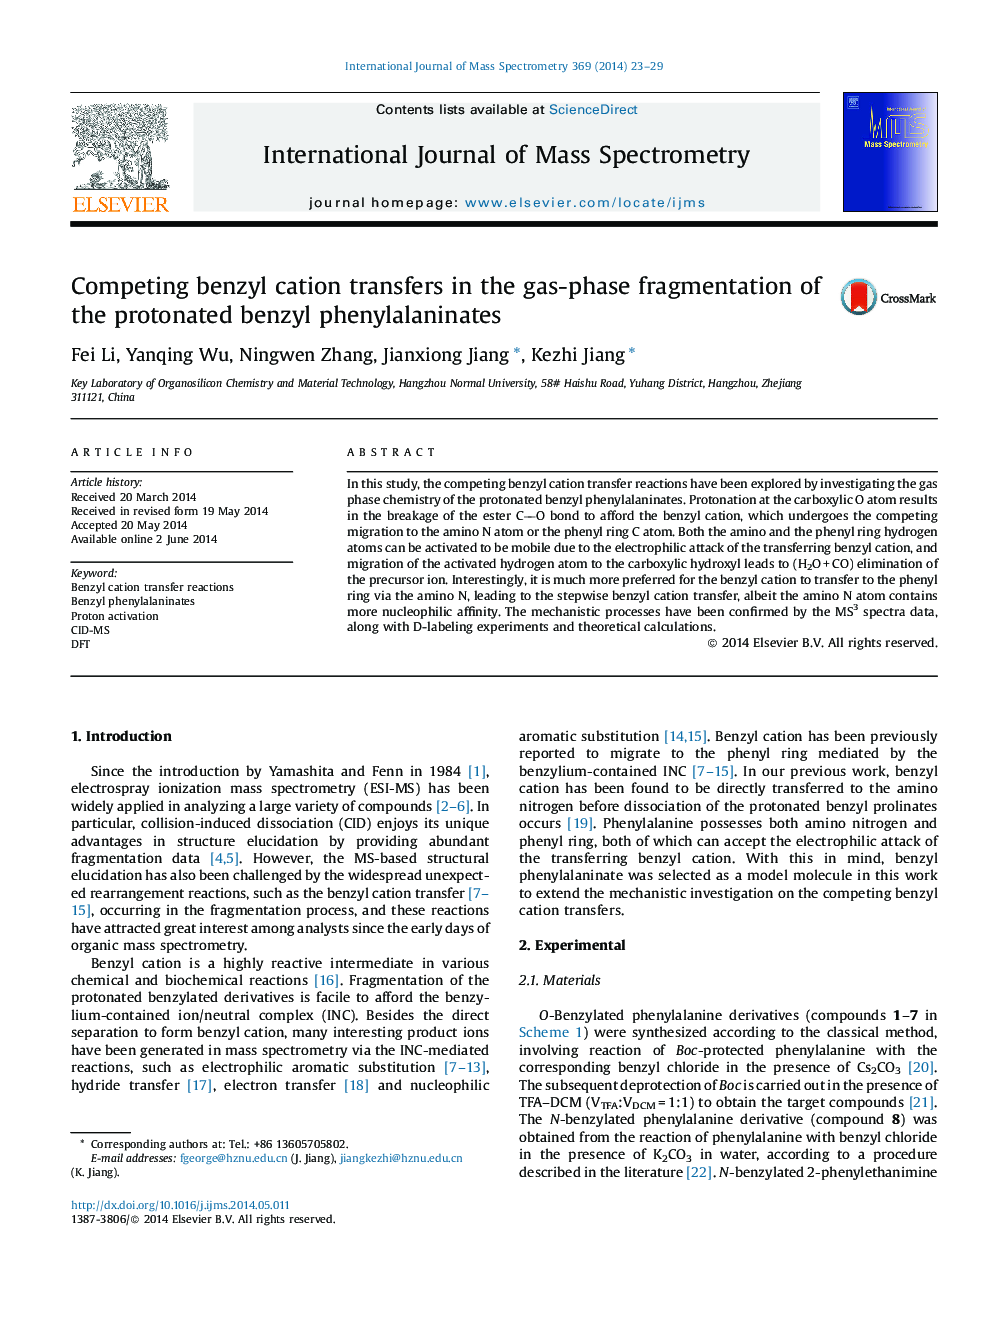 Competing benzyl cation transfers in the gas-phase fragmentation of the protonated benzyl phenylalaninates